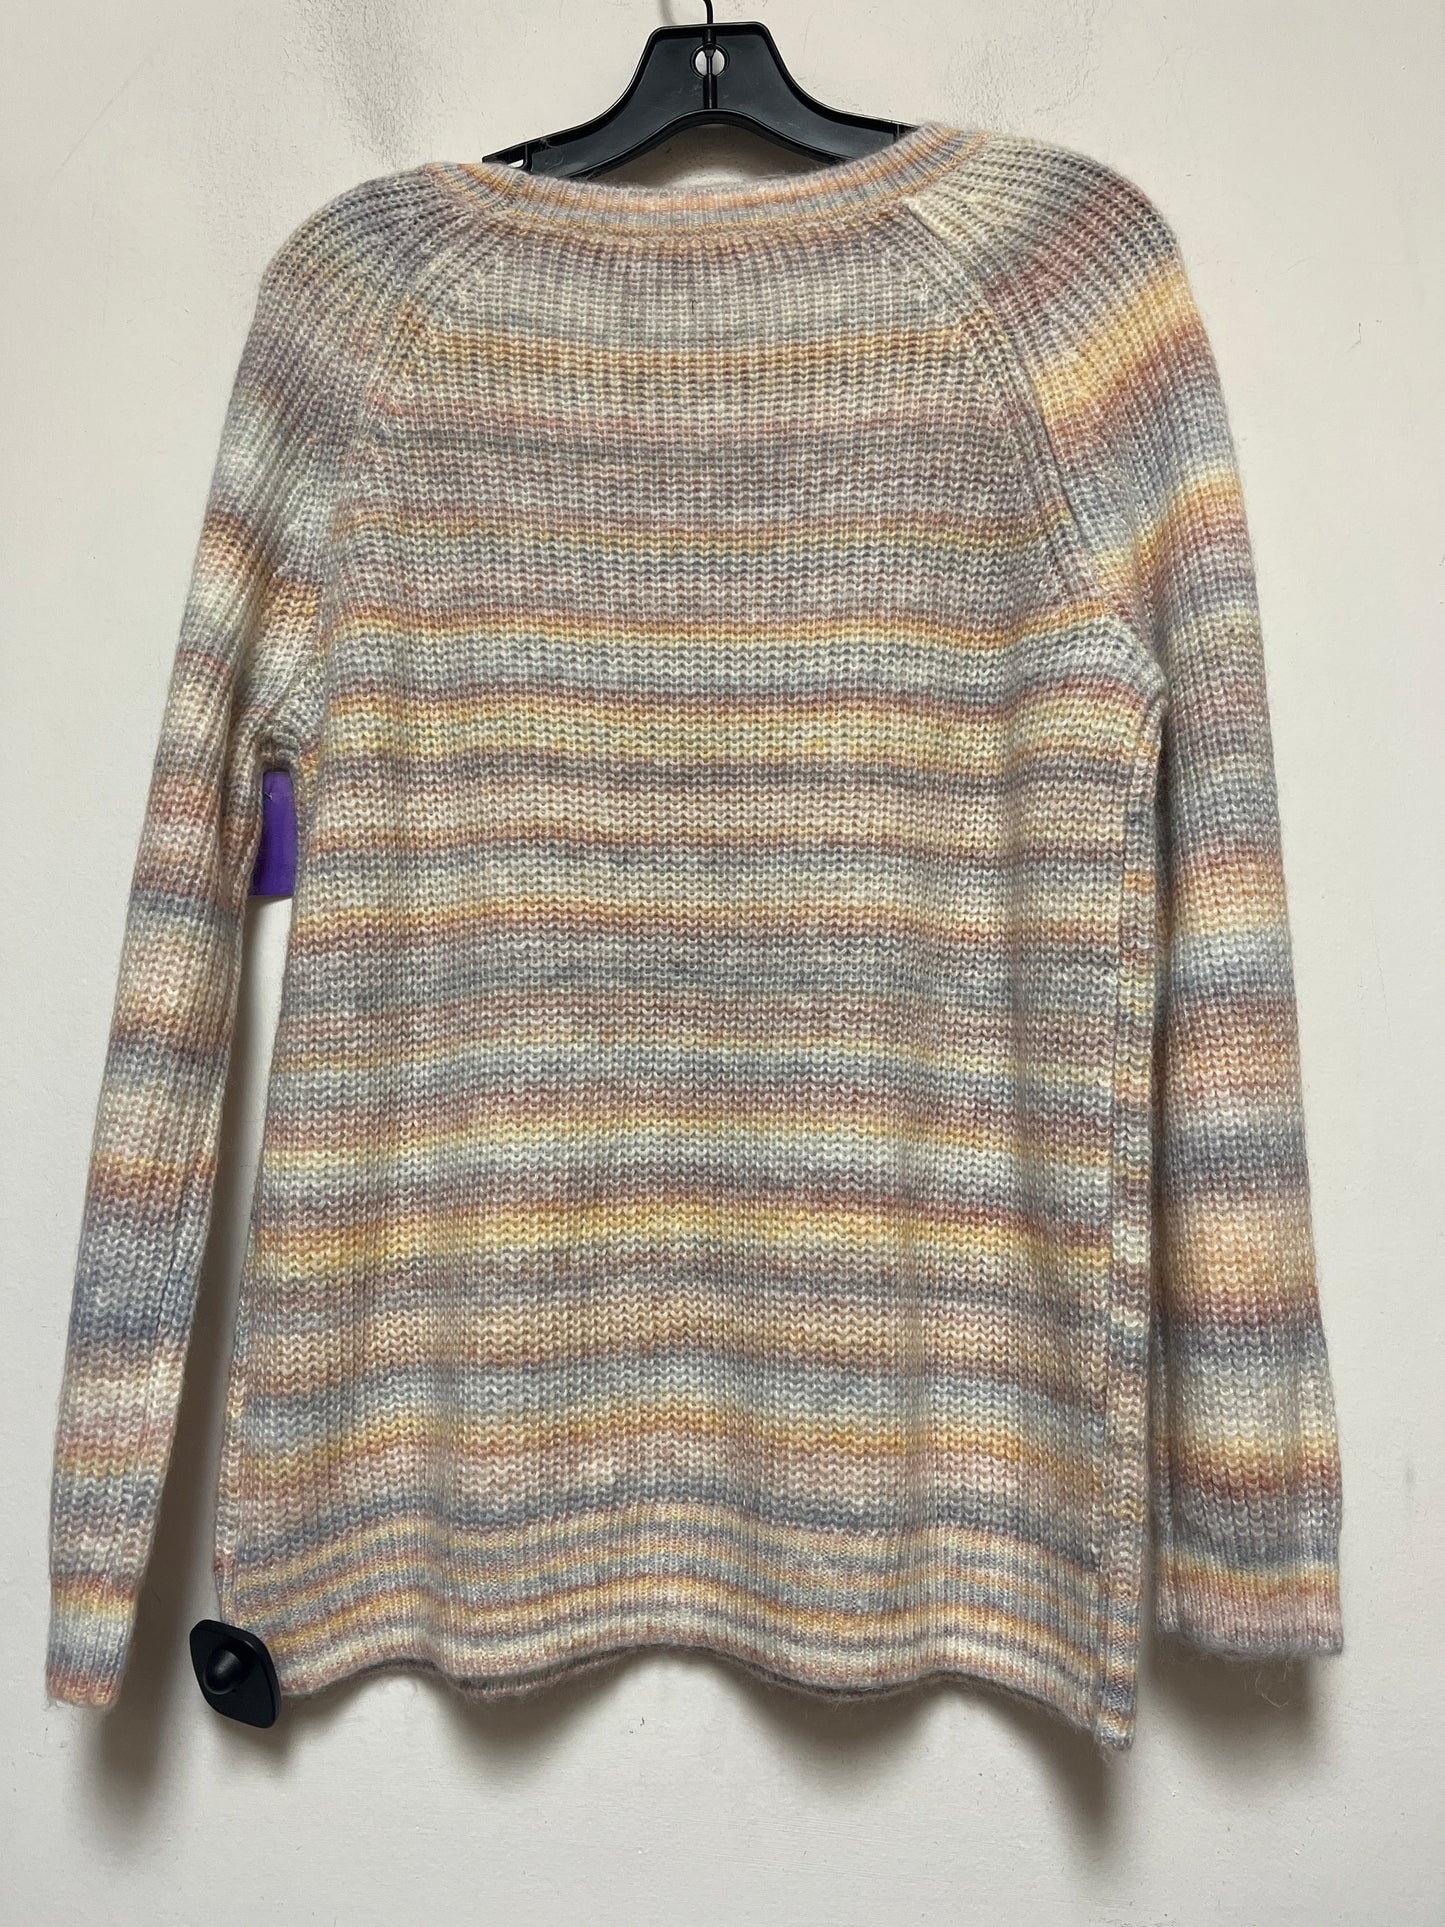 Sweater By Soft Surroundings  Size: S